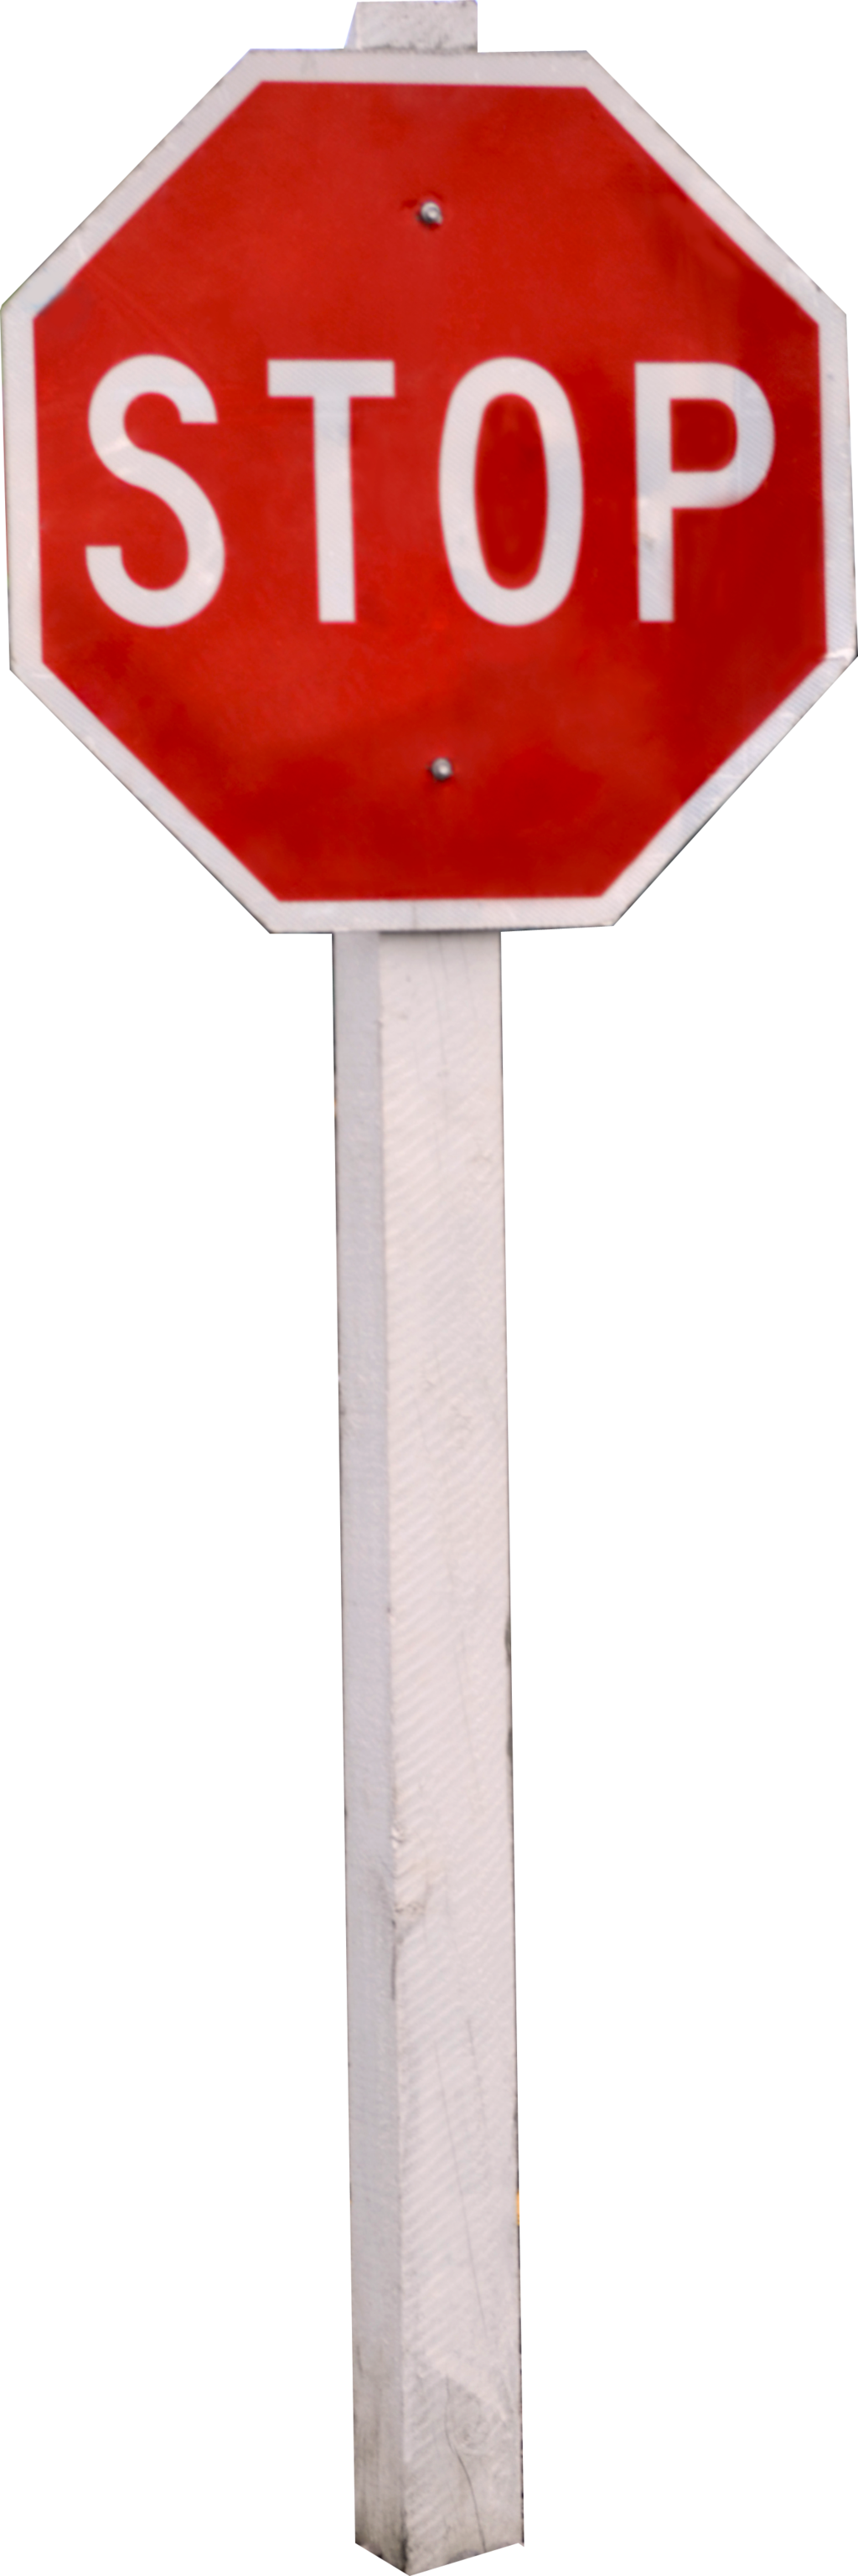 Red Stop Signon Post PNG image